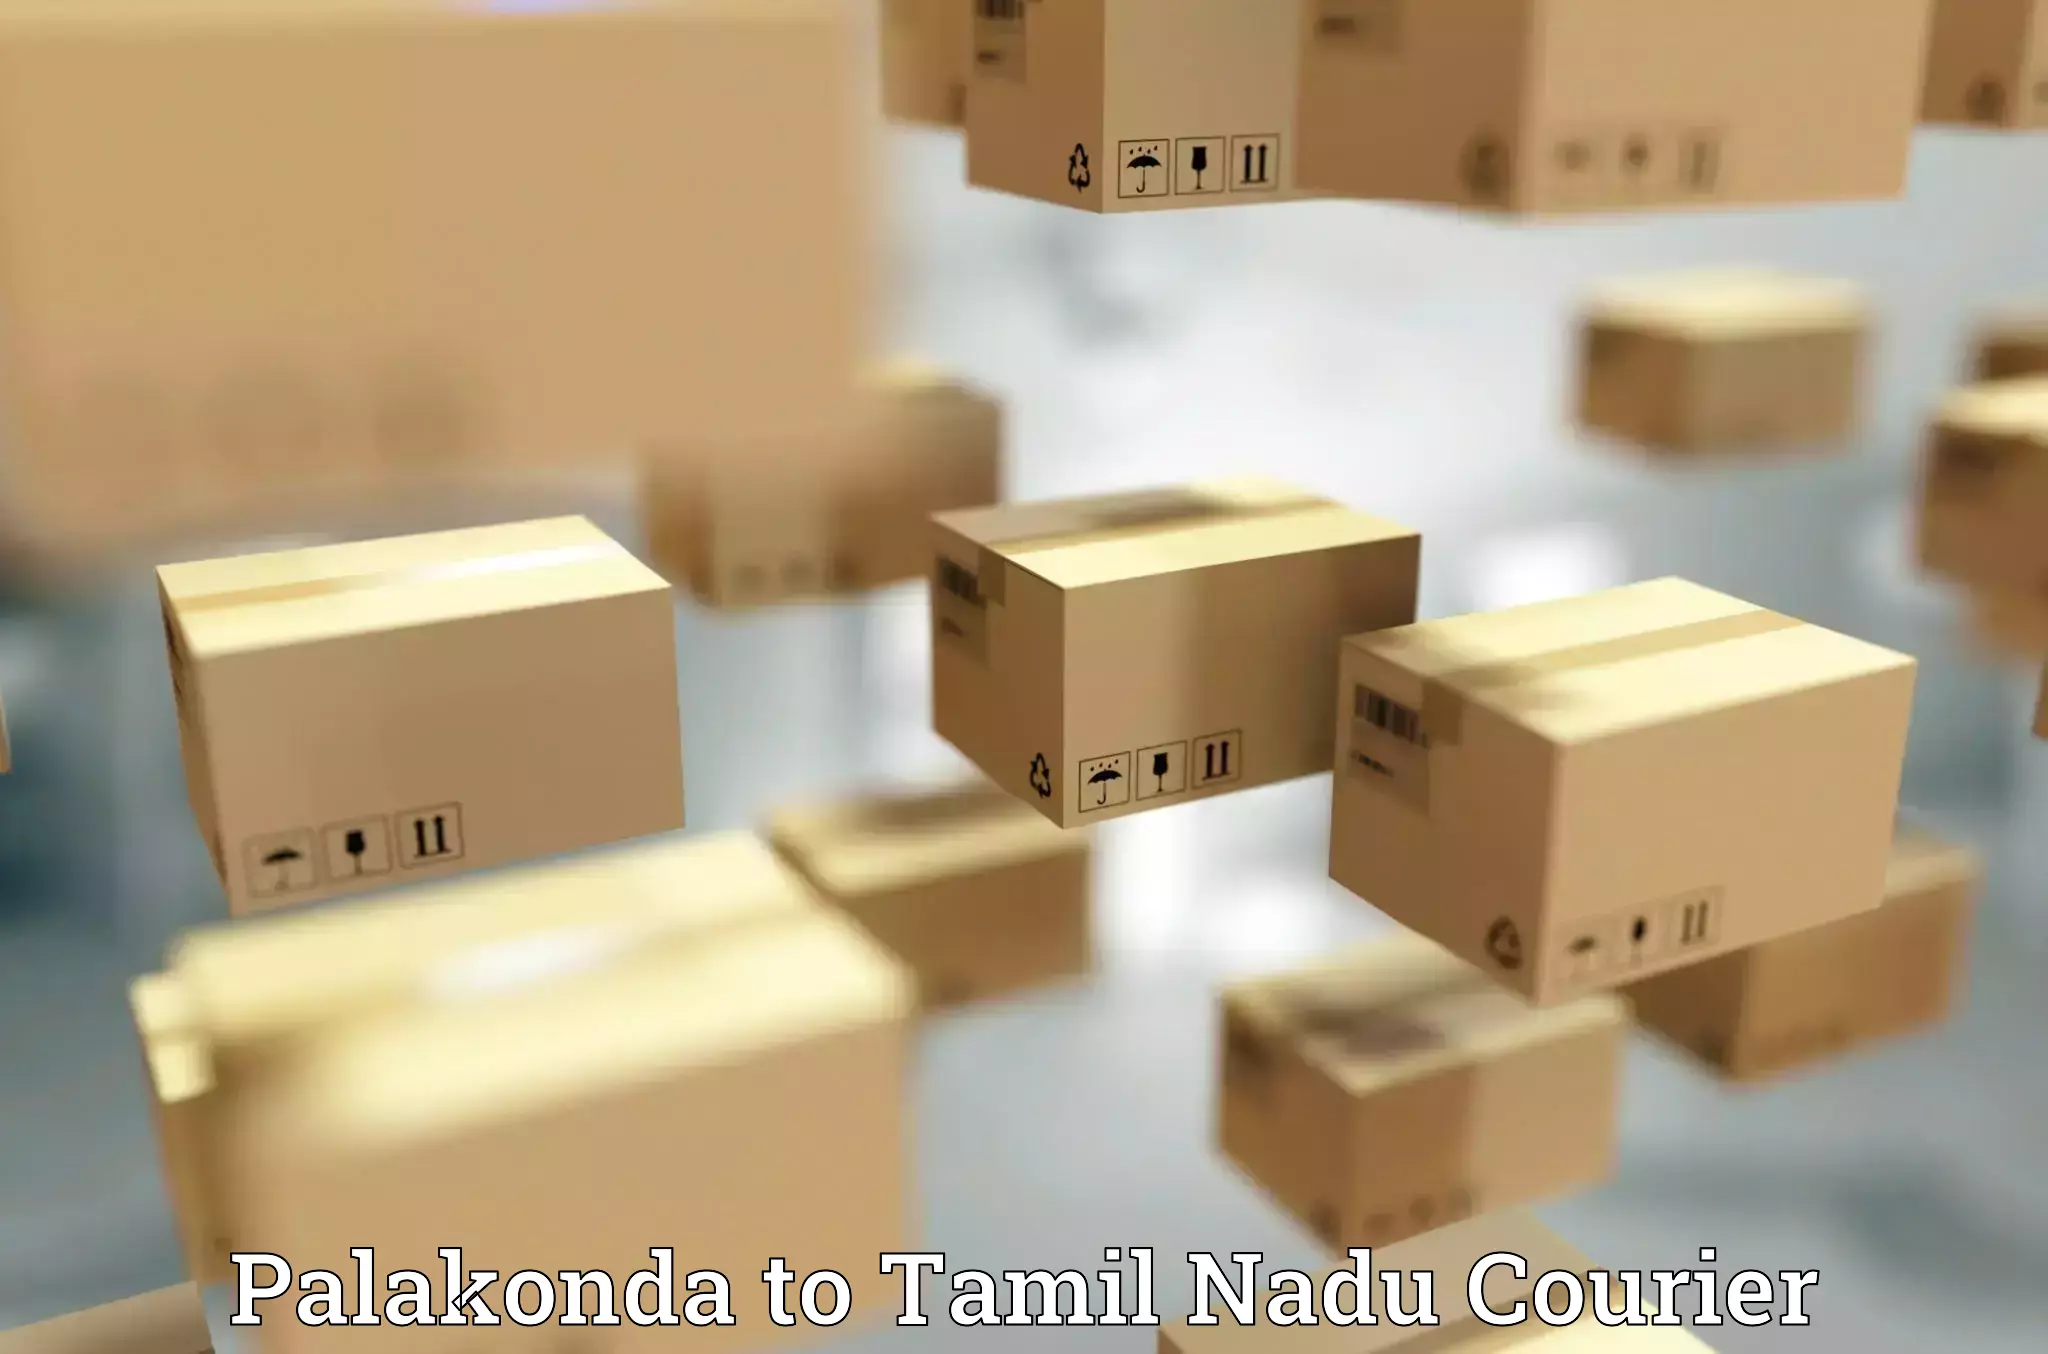 Shipping and handling Palakonda to Meenakshi Academy of Higher Education and Research Chennai